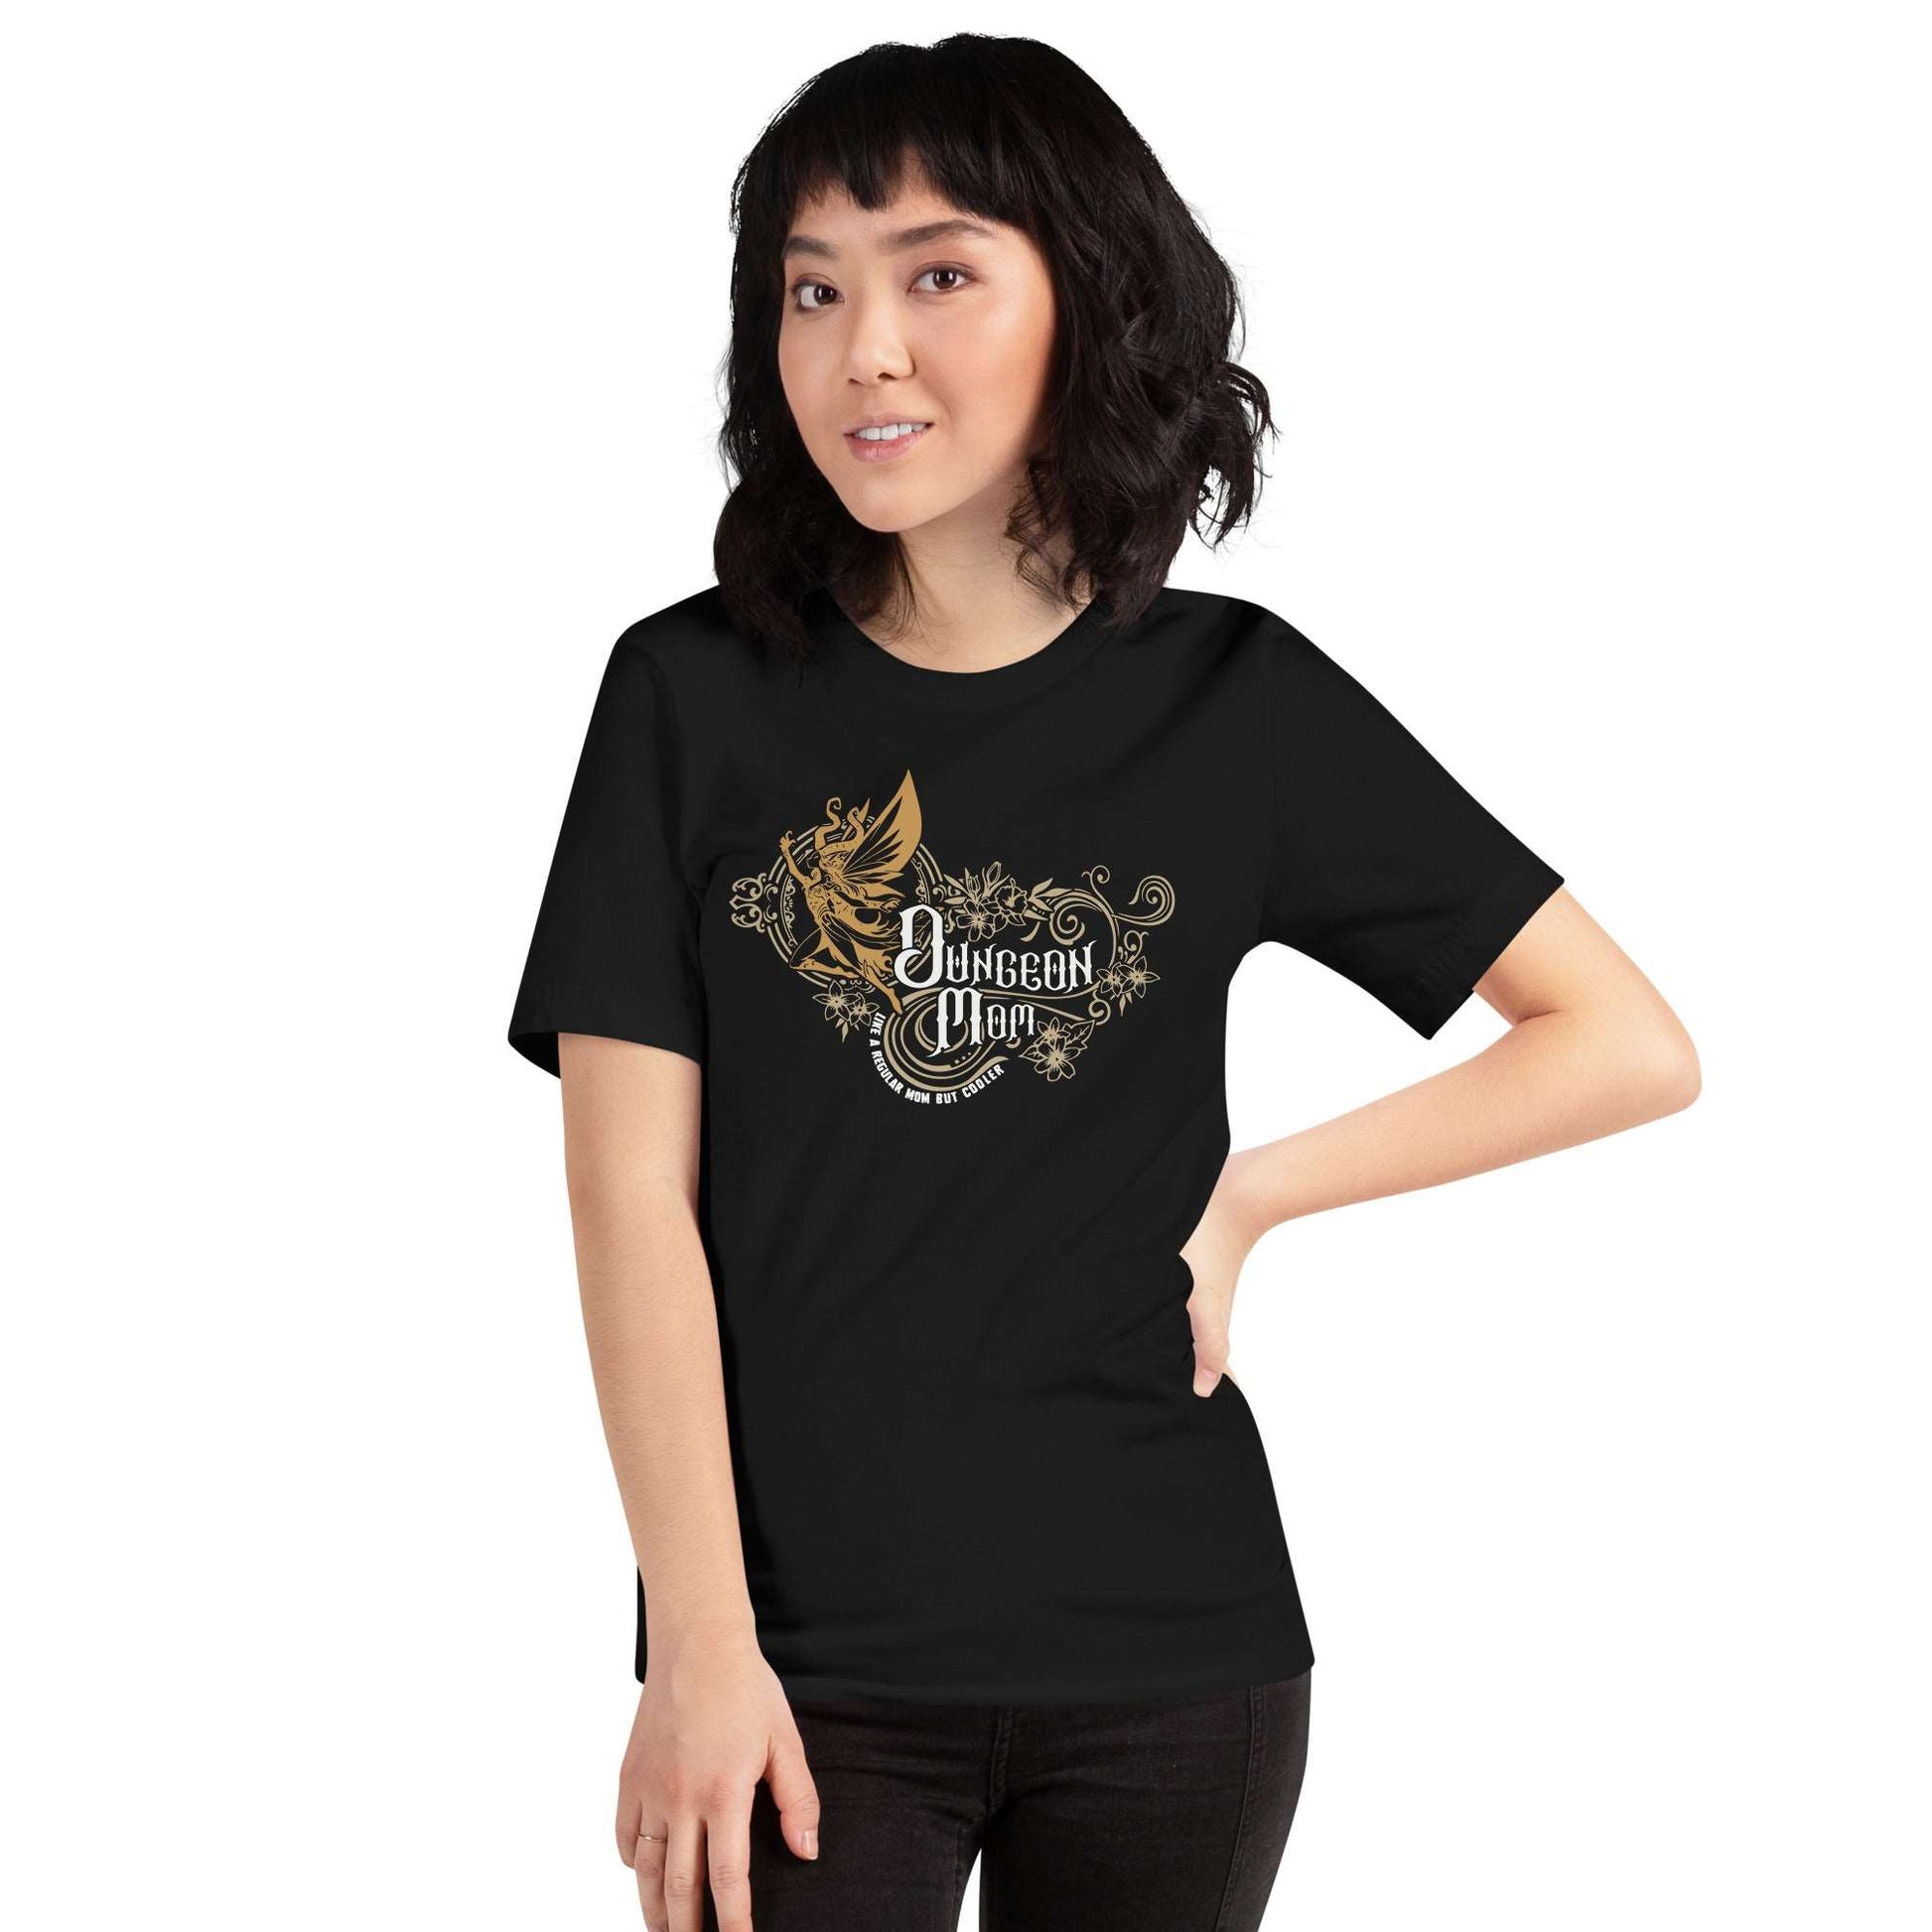 DnD Dungeon Mom Shirt - Dungeons & Dragons Dungeon Mother's Day T-Shirt